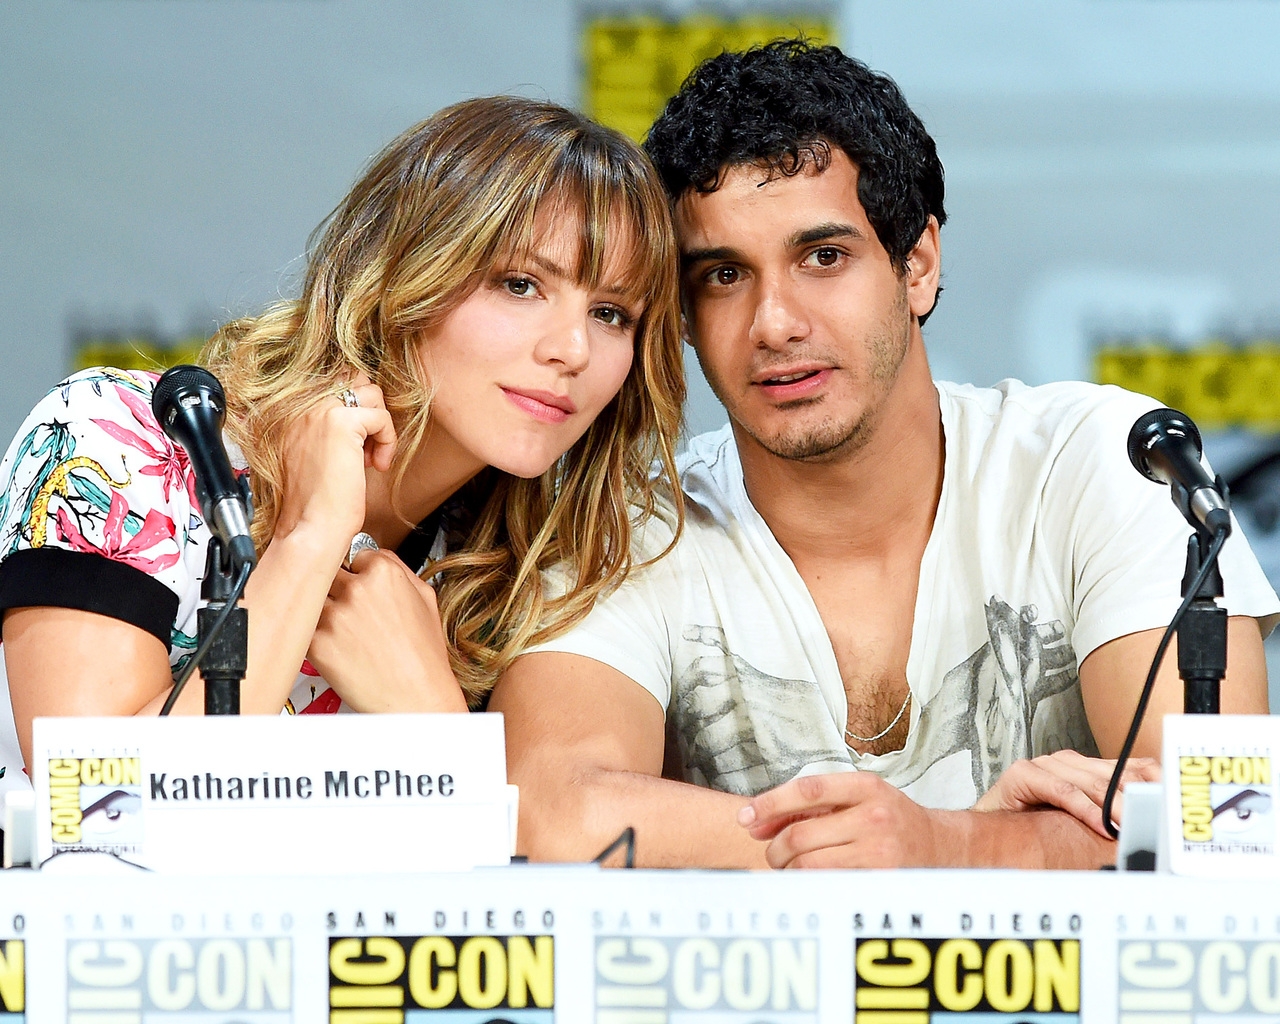 Katharine McPhee and Elyes Gabel for 1280 x 1024 resolution